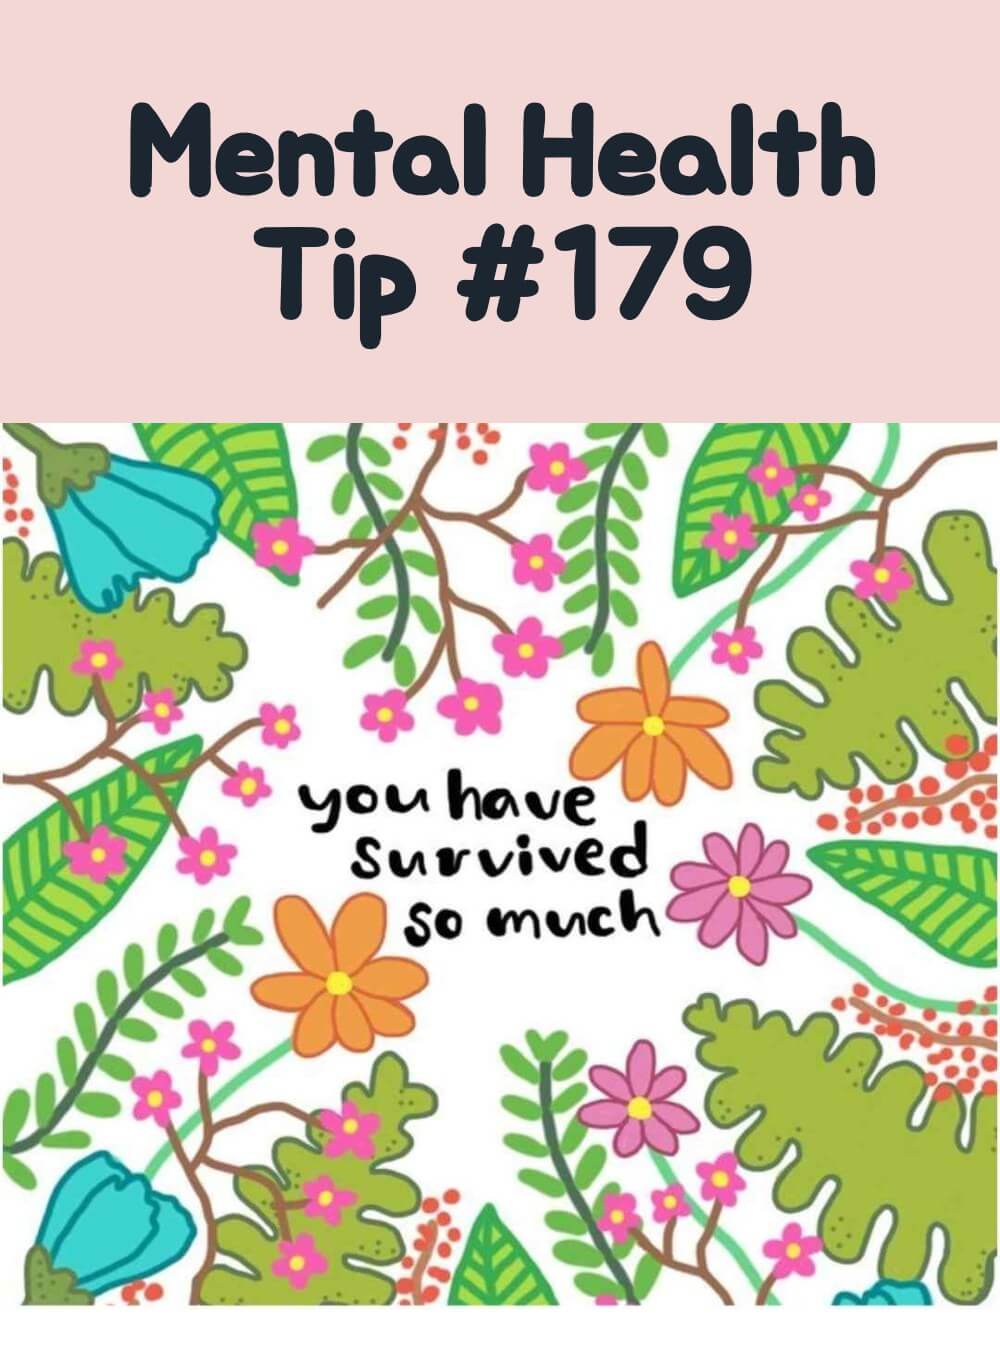 Emotional Well-being Infographic | Mental Health Tip #179